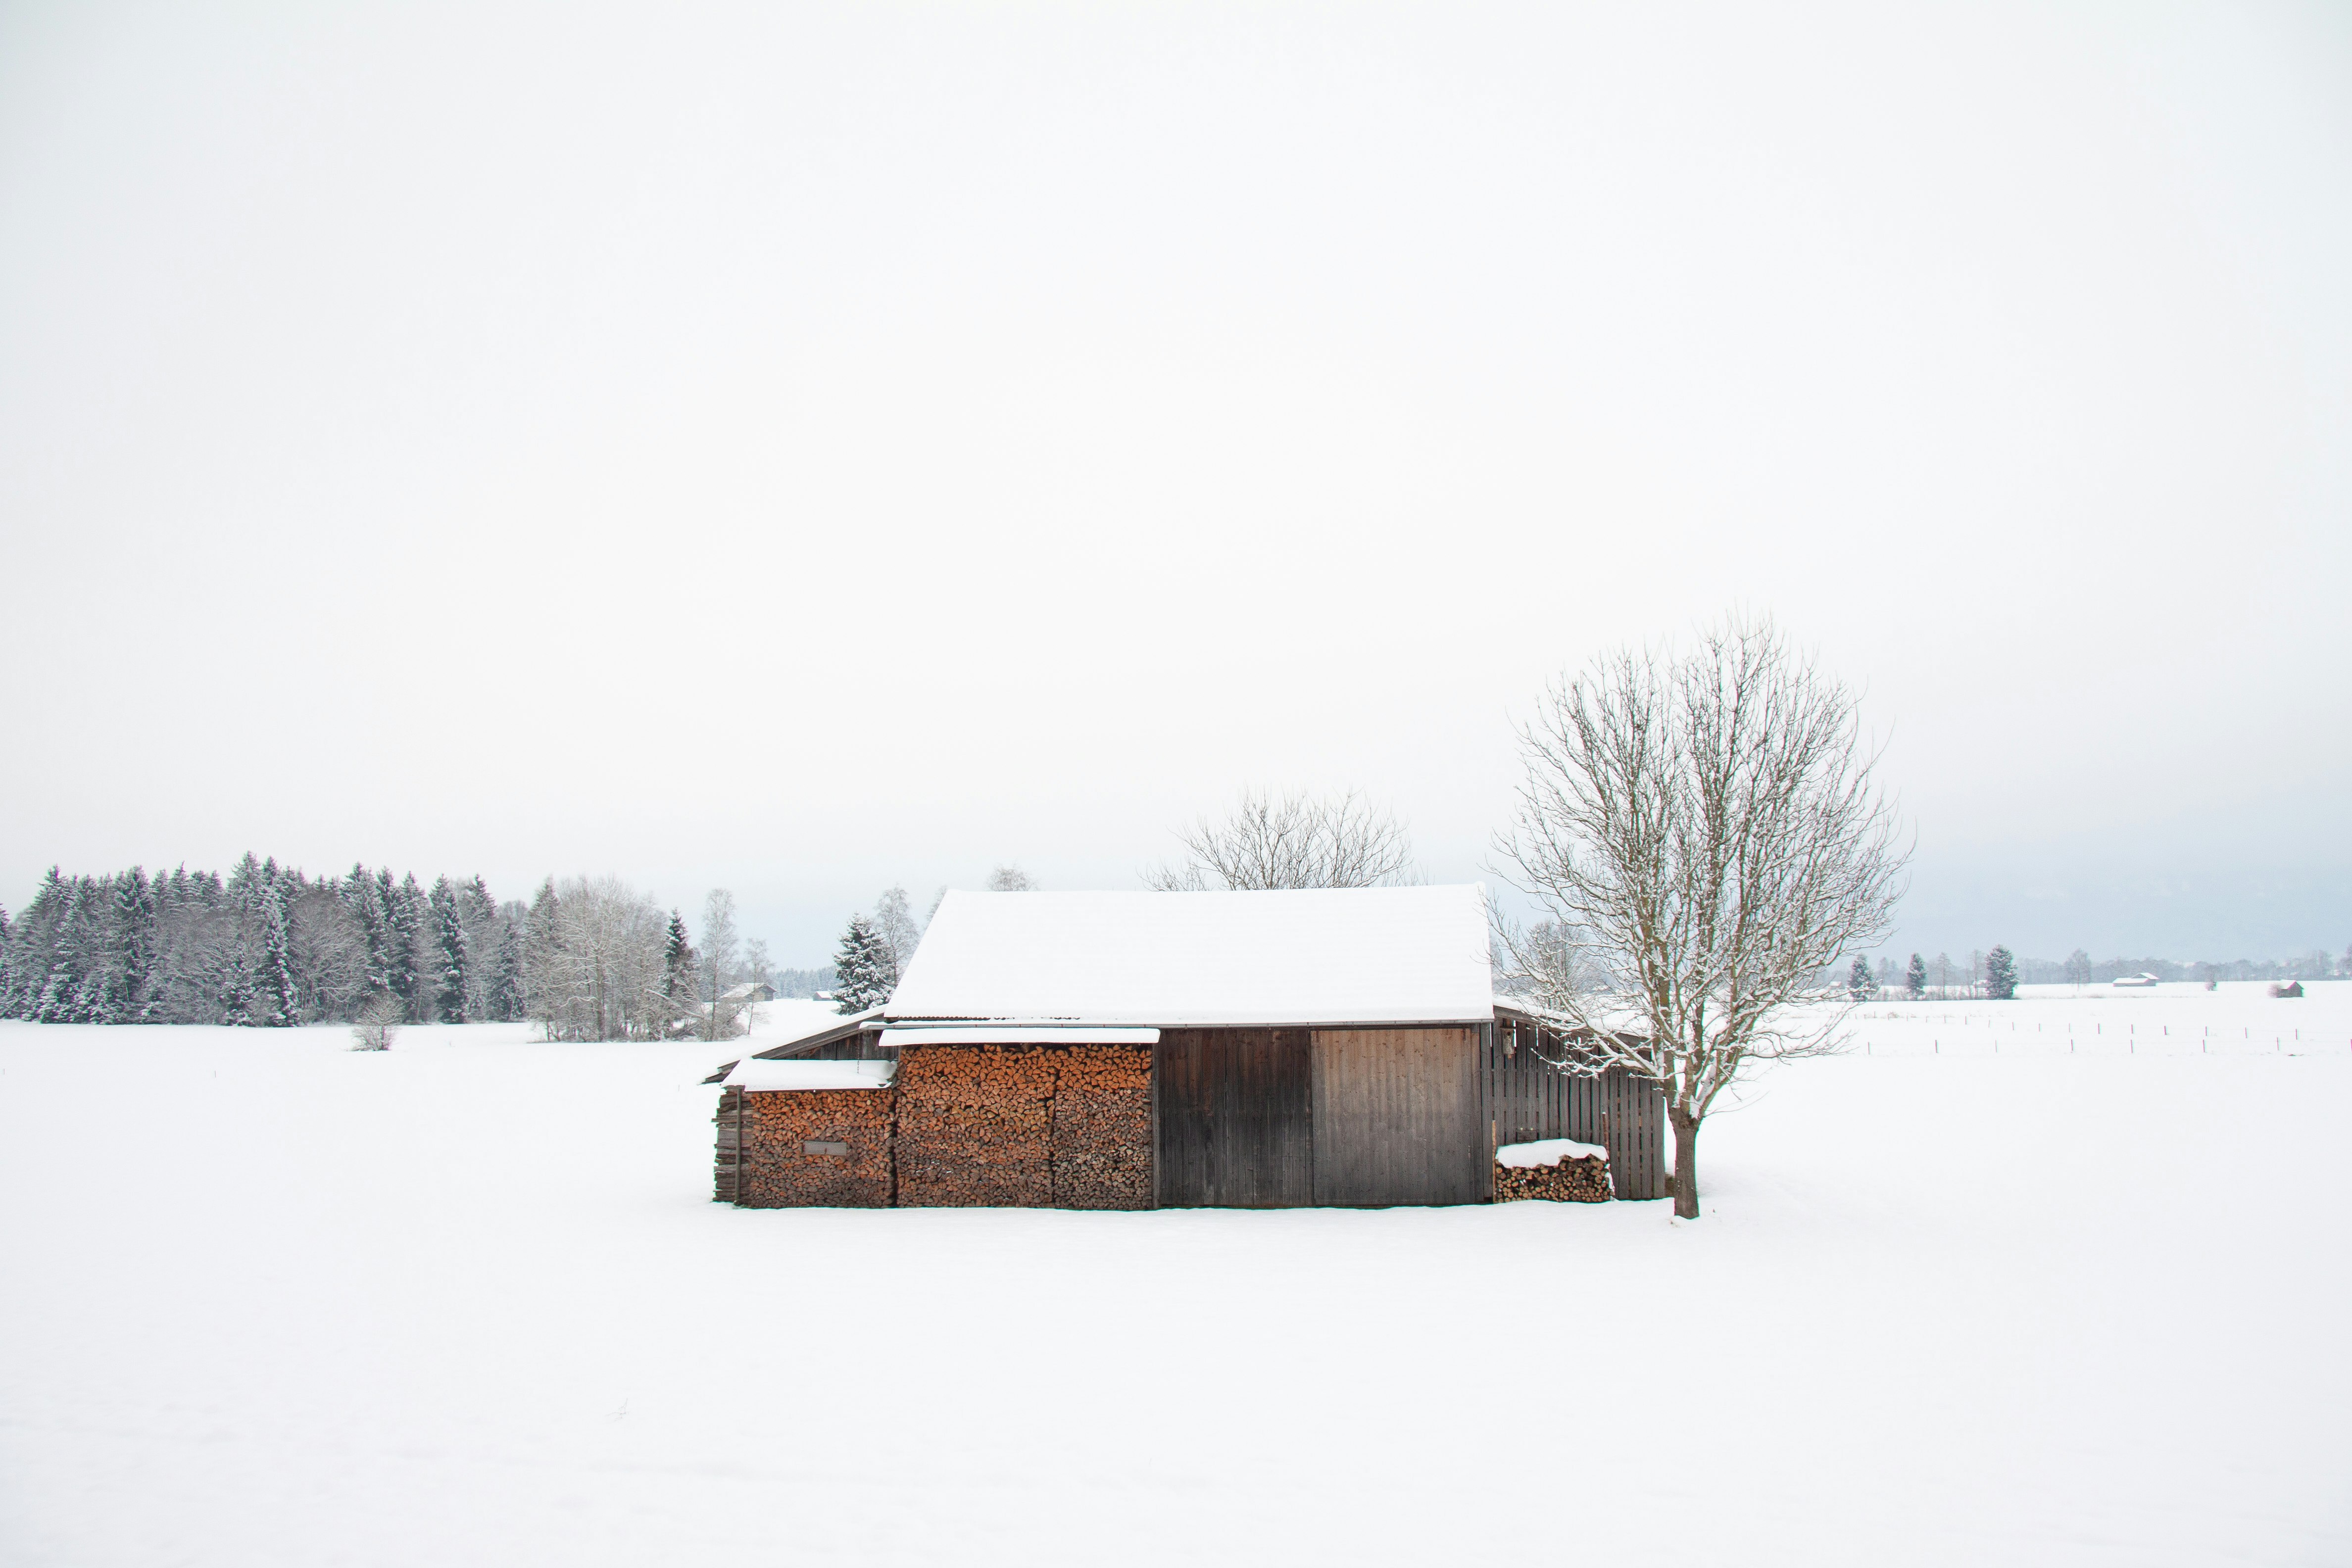 Wood storage and hut in the snow in winter